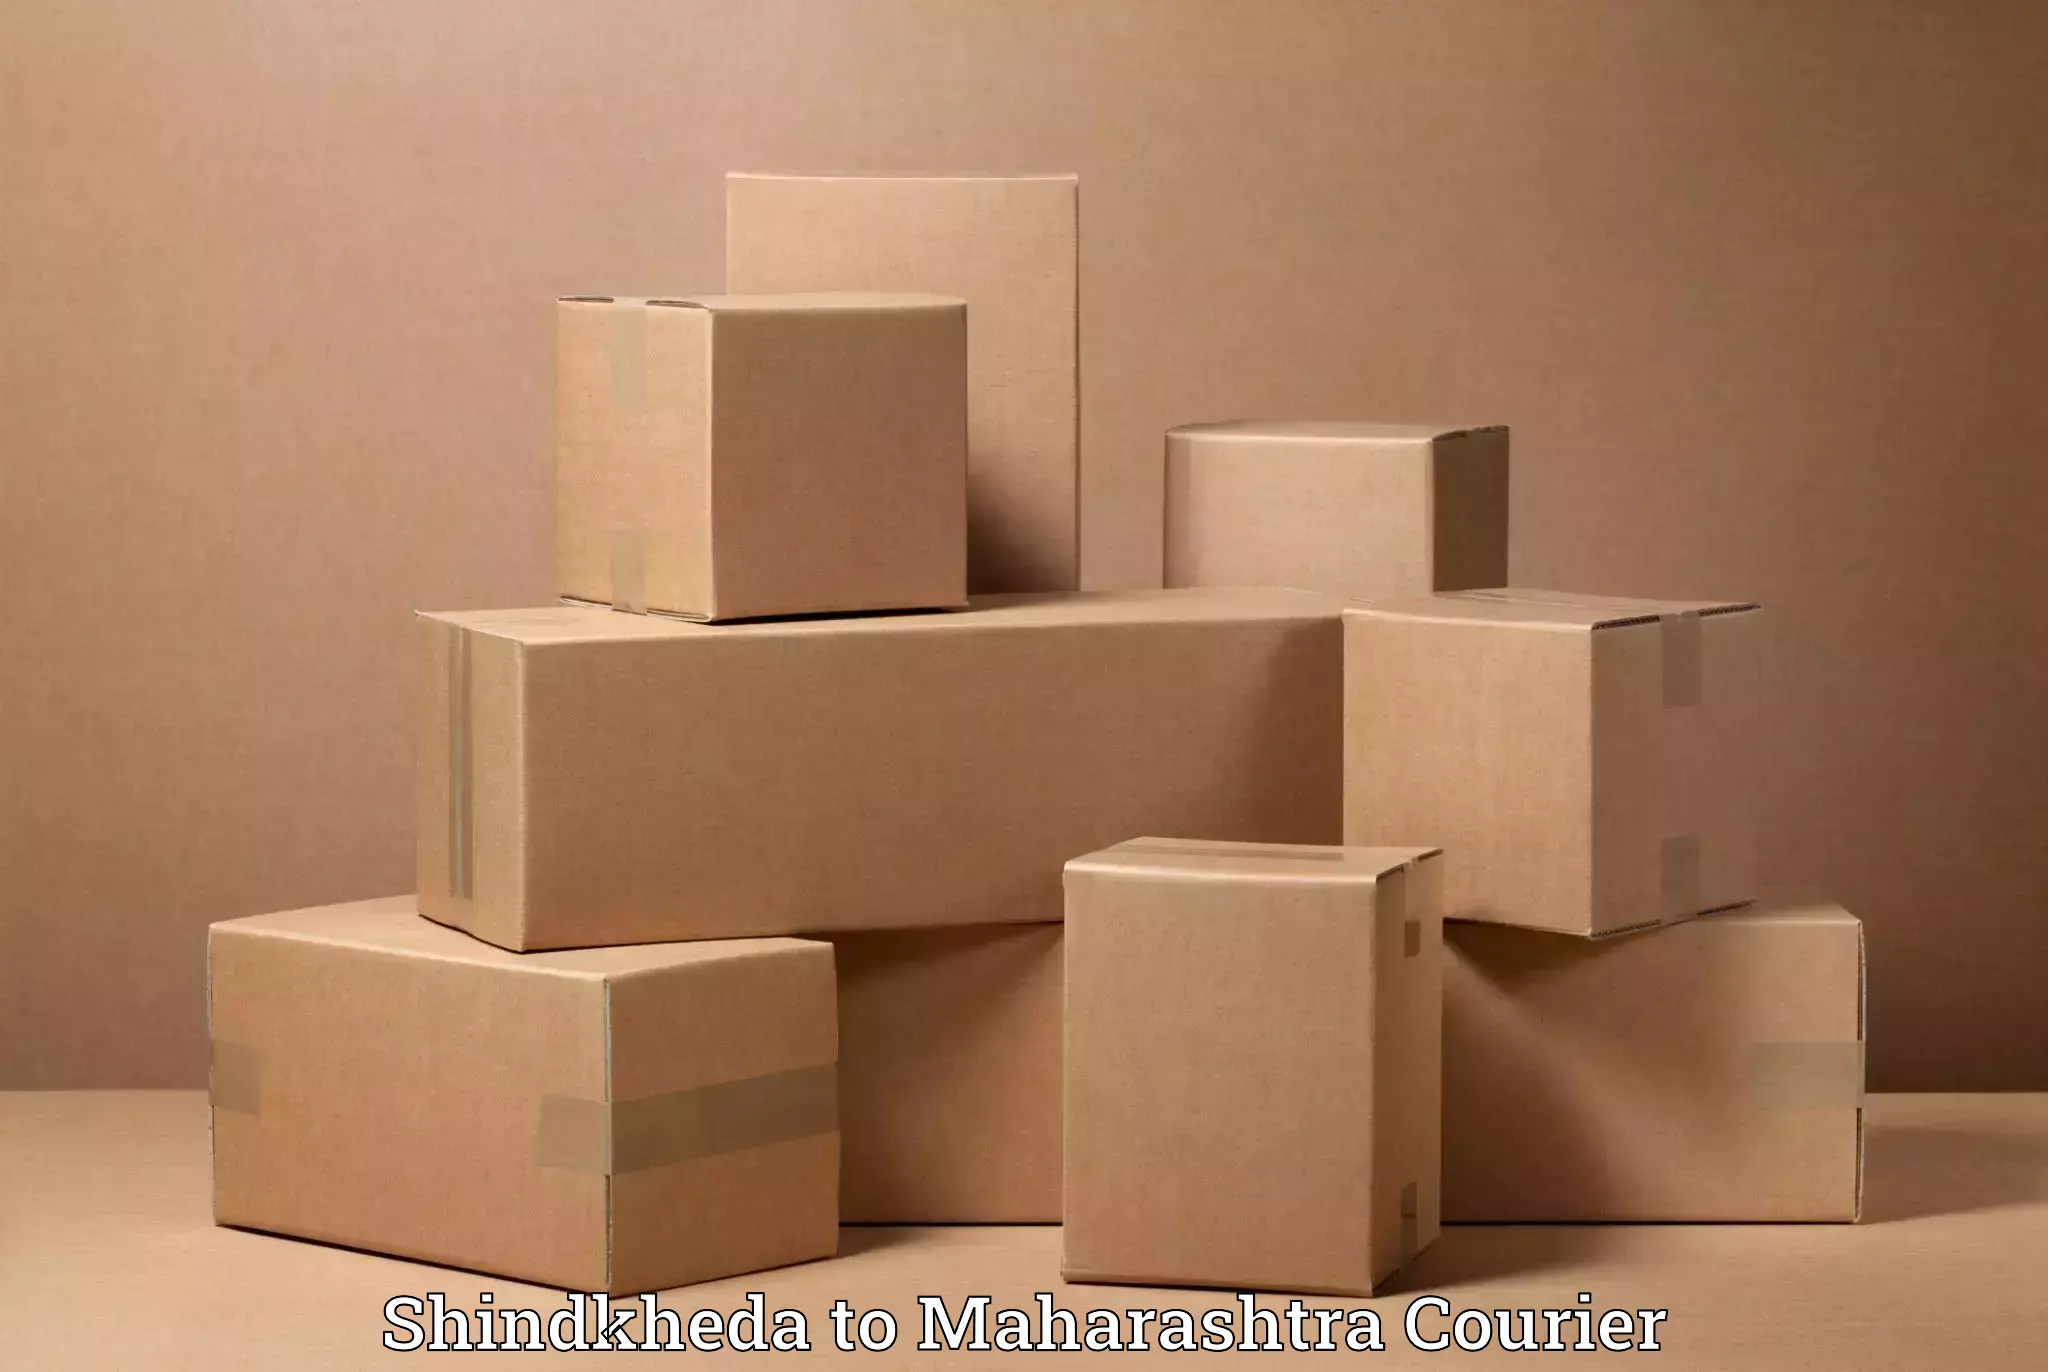 Quality relocation services in Shindkheda to Ahmednagar